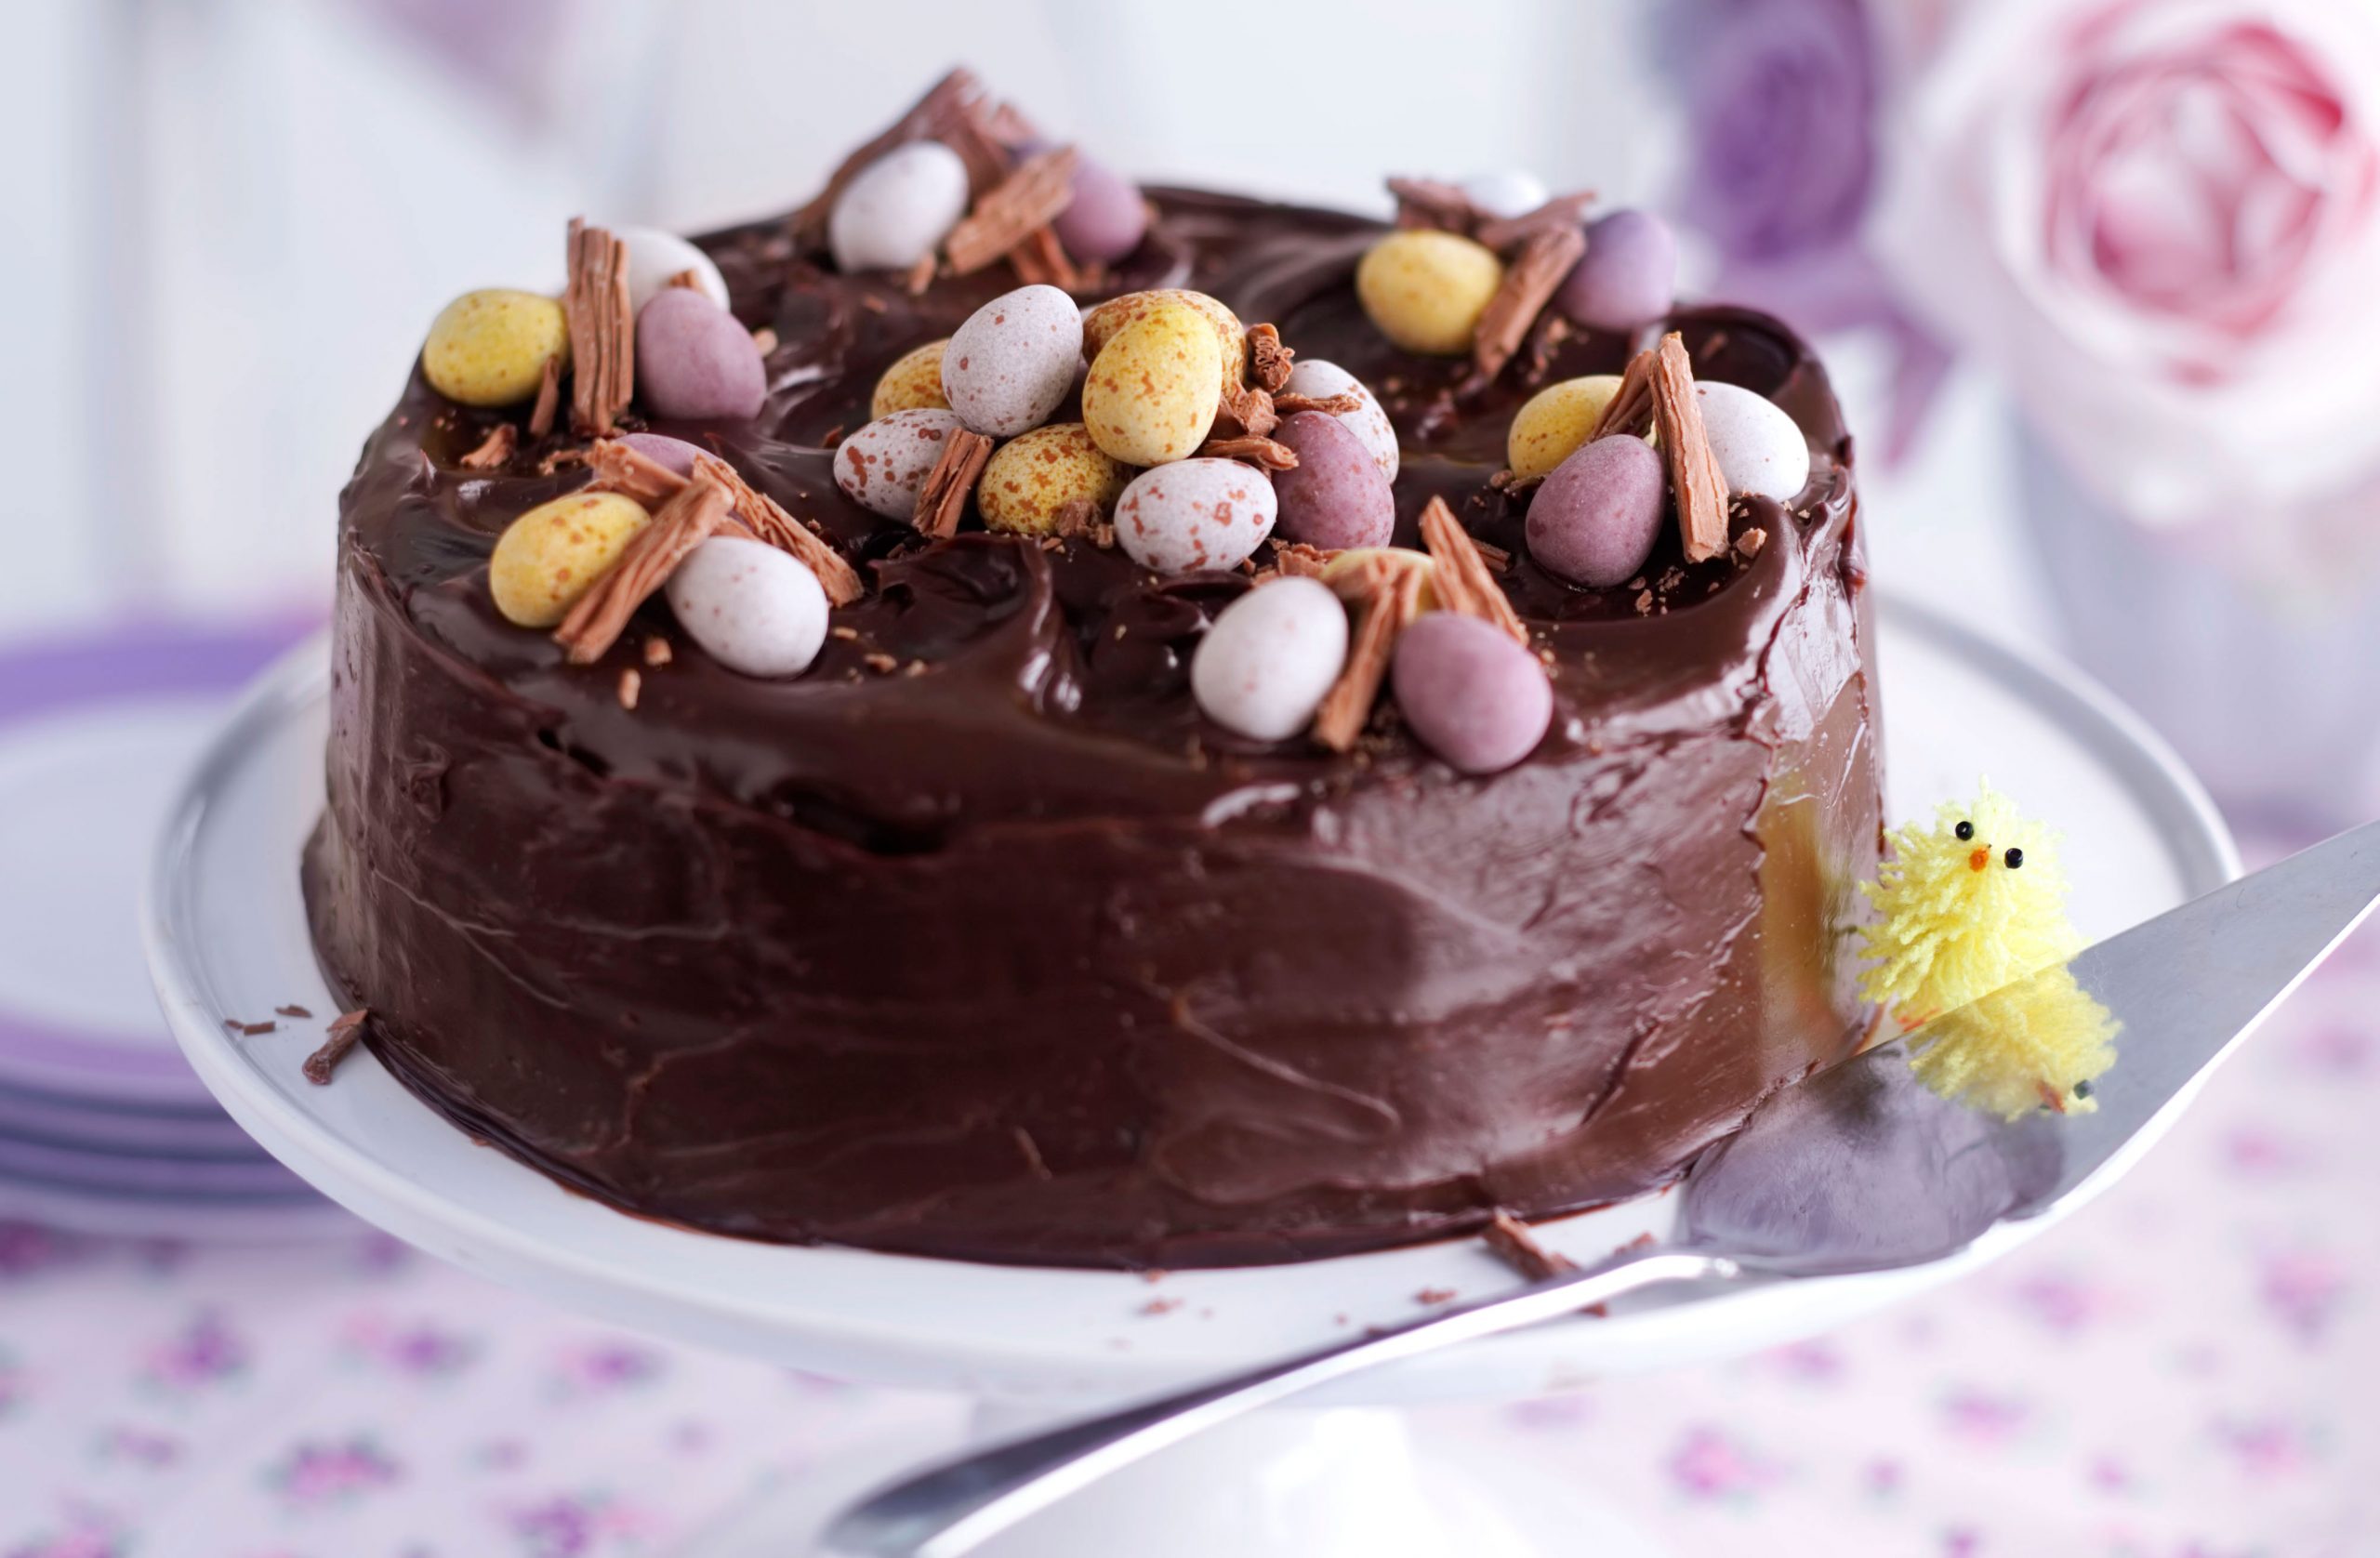 Mouthwatering cakes for kids and chocolate lovers